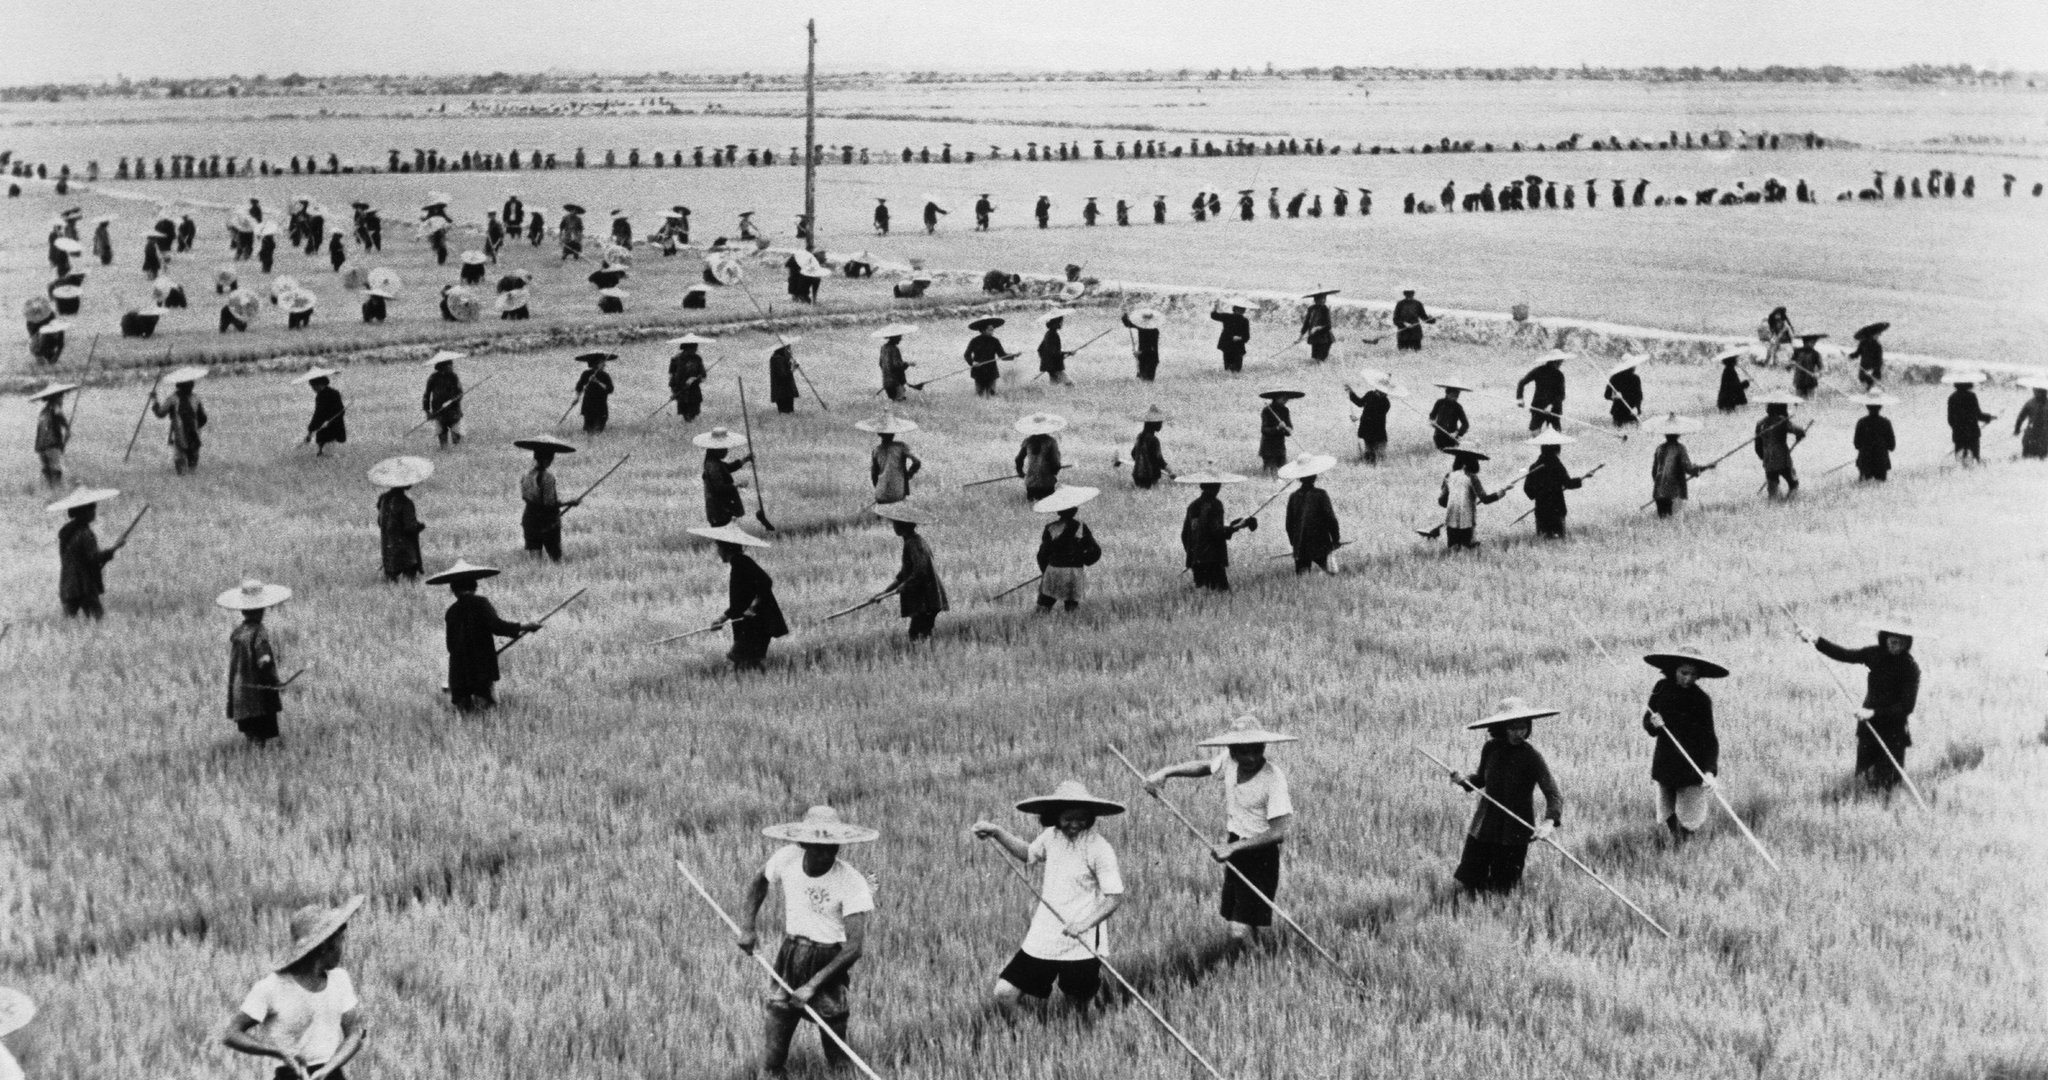 A rice field in what is now Guangdong Province, 1958